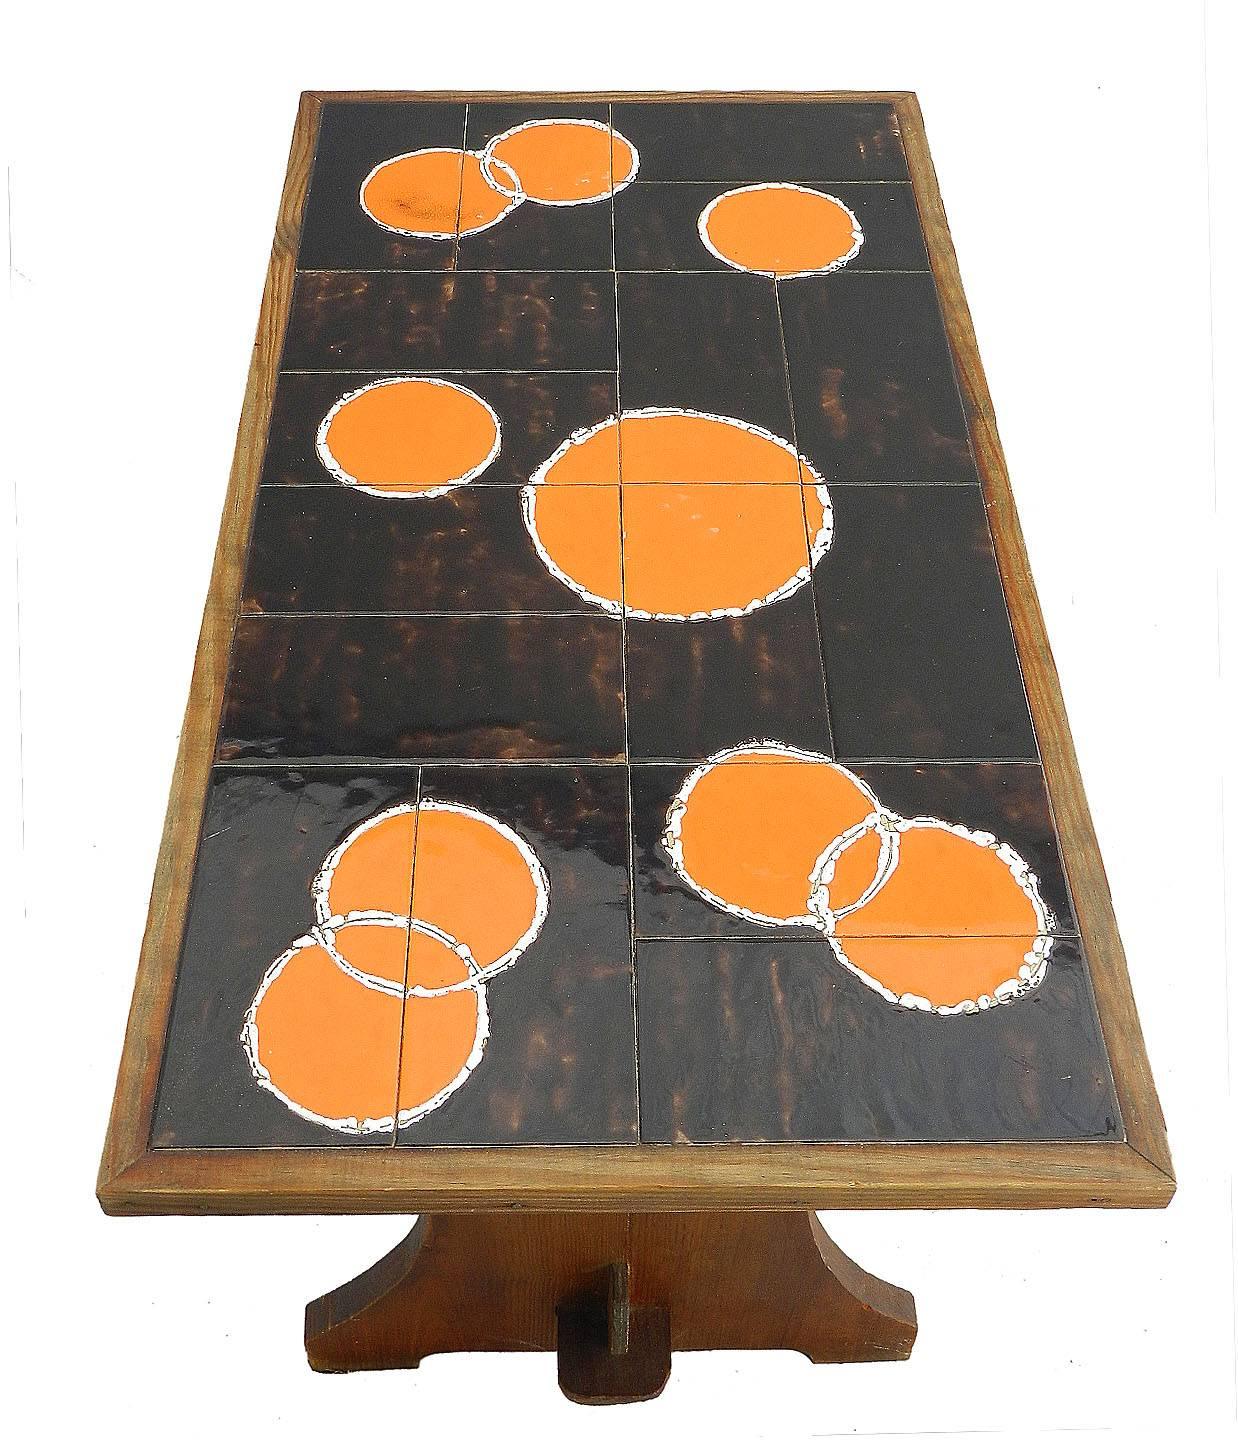 Midcentury Coffee Table Refectory Pine with Tiled Top, circa 1960s 
Orange pop art tiles
Stained Pine base
We offer a global parcel and a door to door freight service as well as 1stdibs delivery service. Please contact us for a non-binding delivery